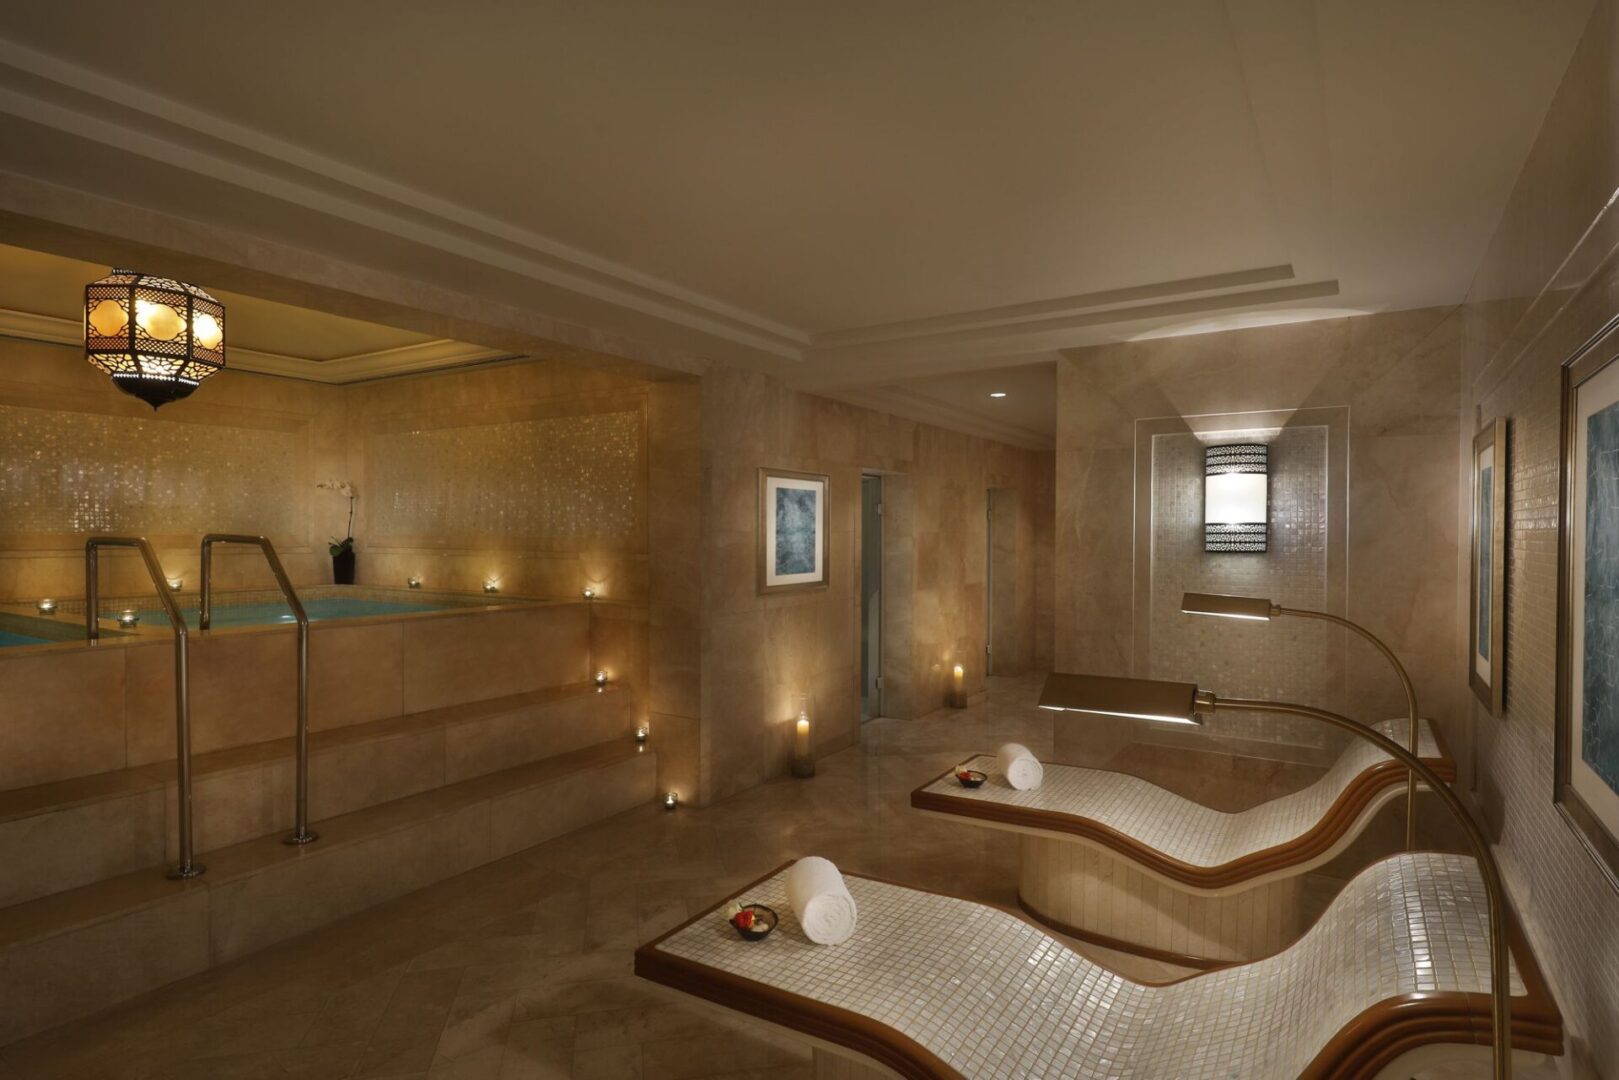 A spa room with two beds and a large tub